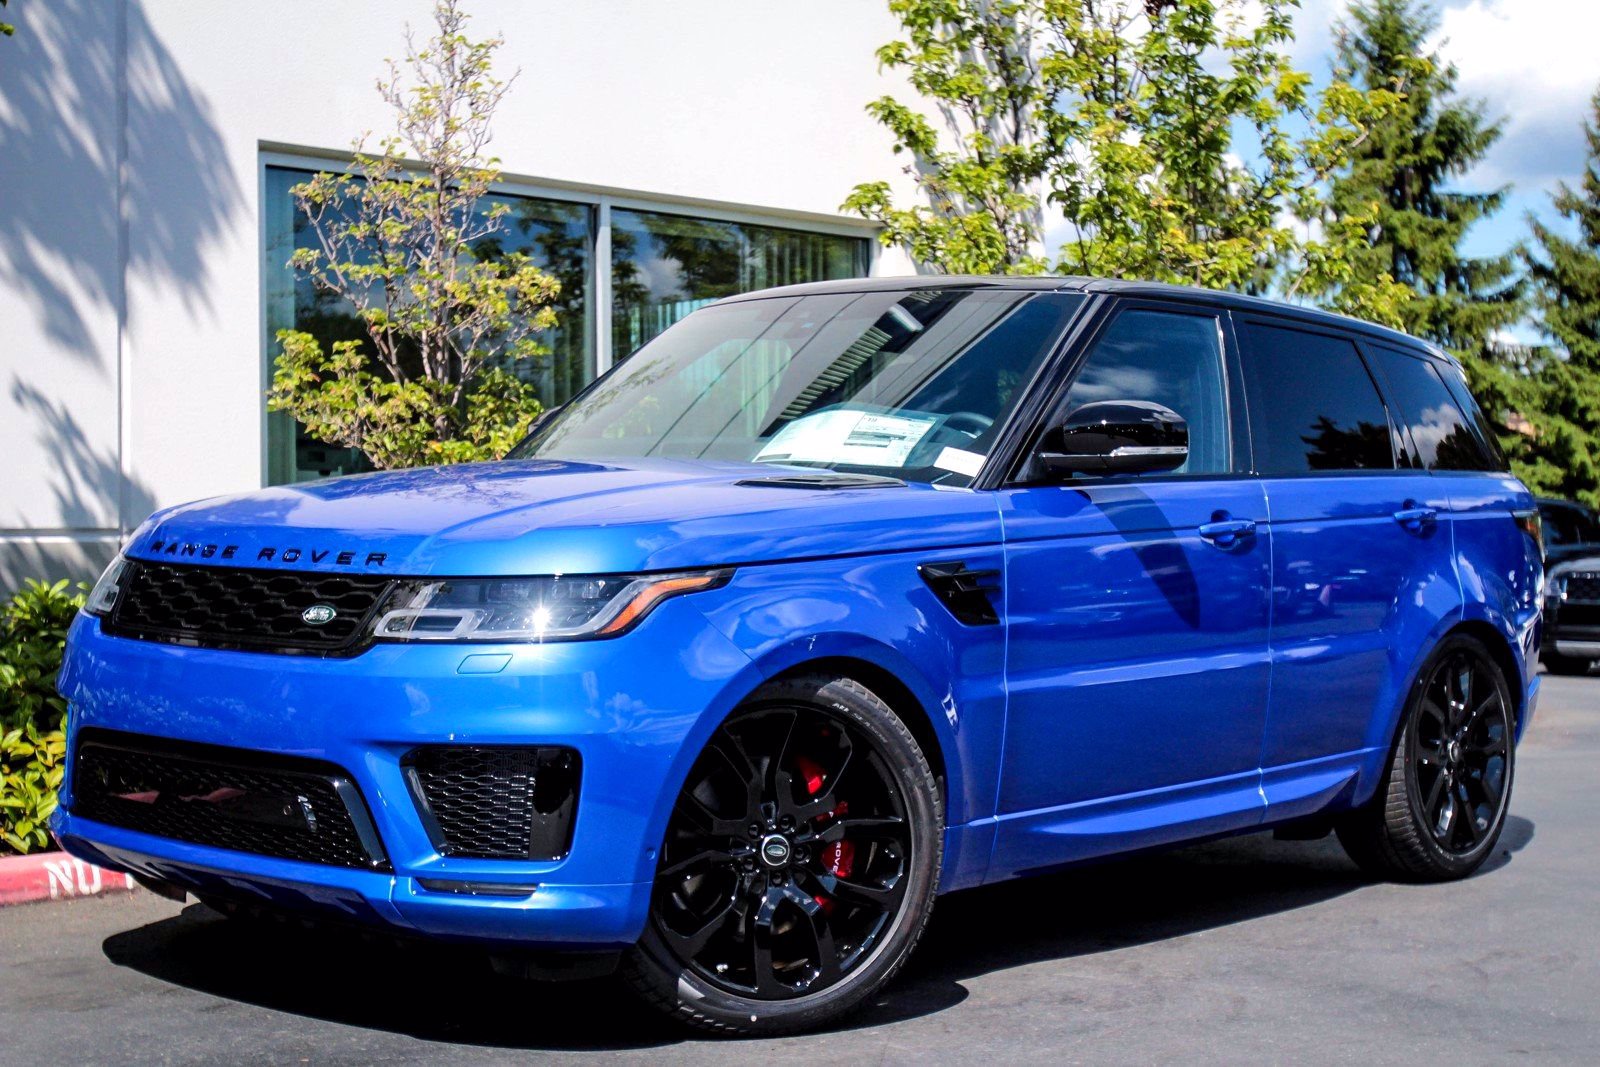 New 2020 Land Rover Range Rover Sport Hse Dynamic Sport Utility In Bellevue 75673 Land Rover Bellevue